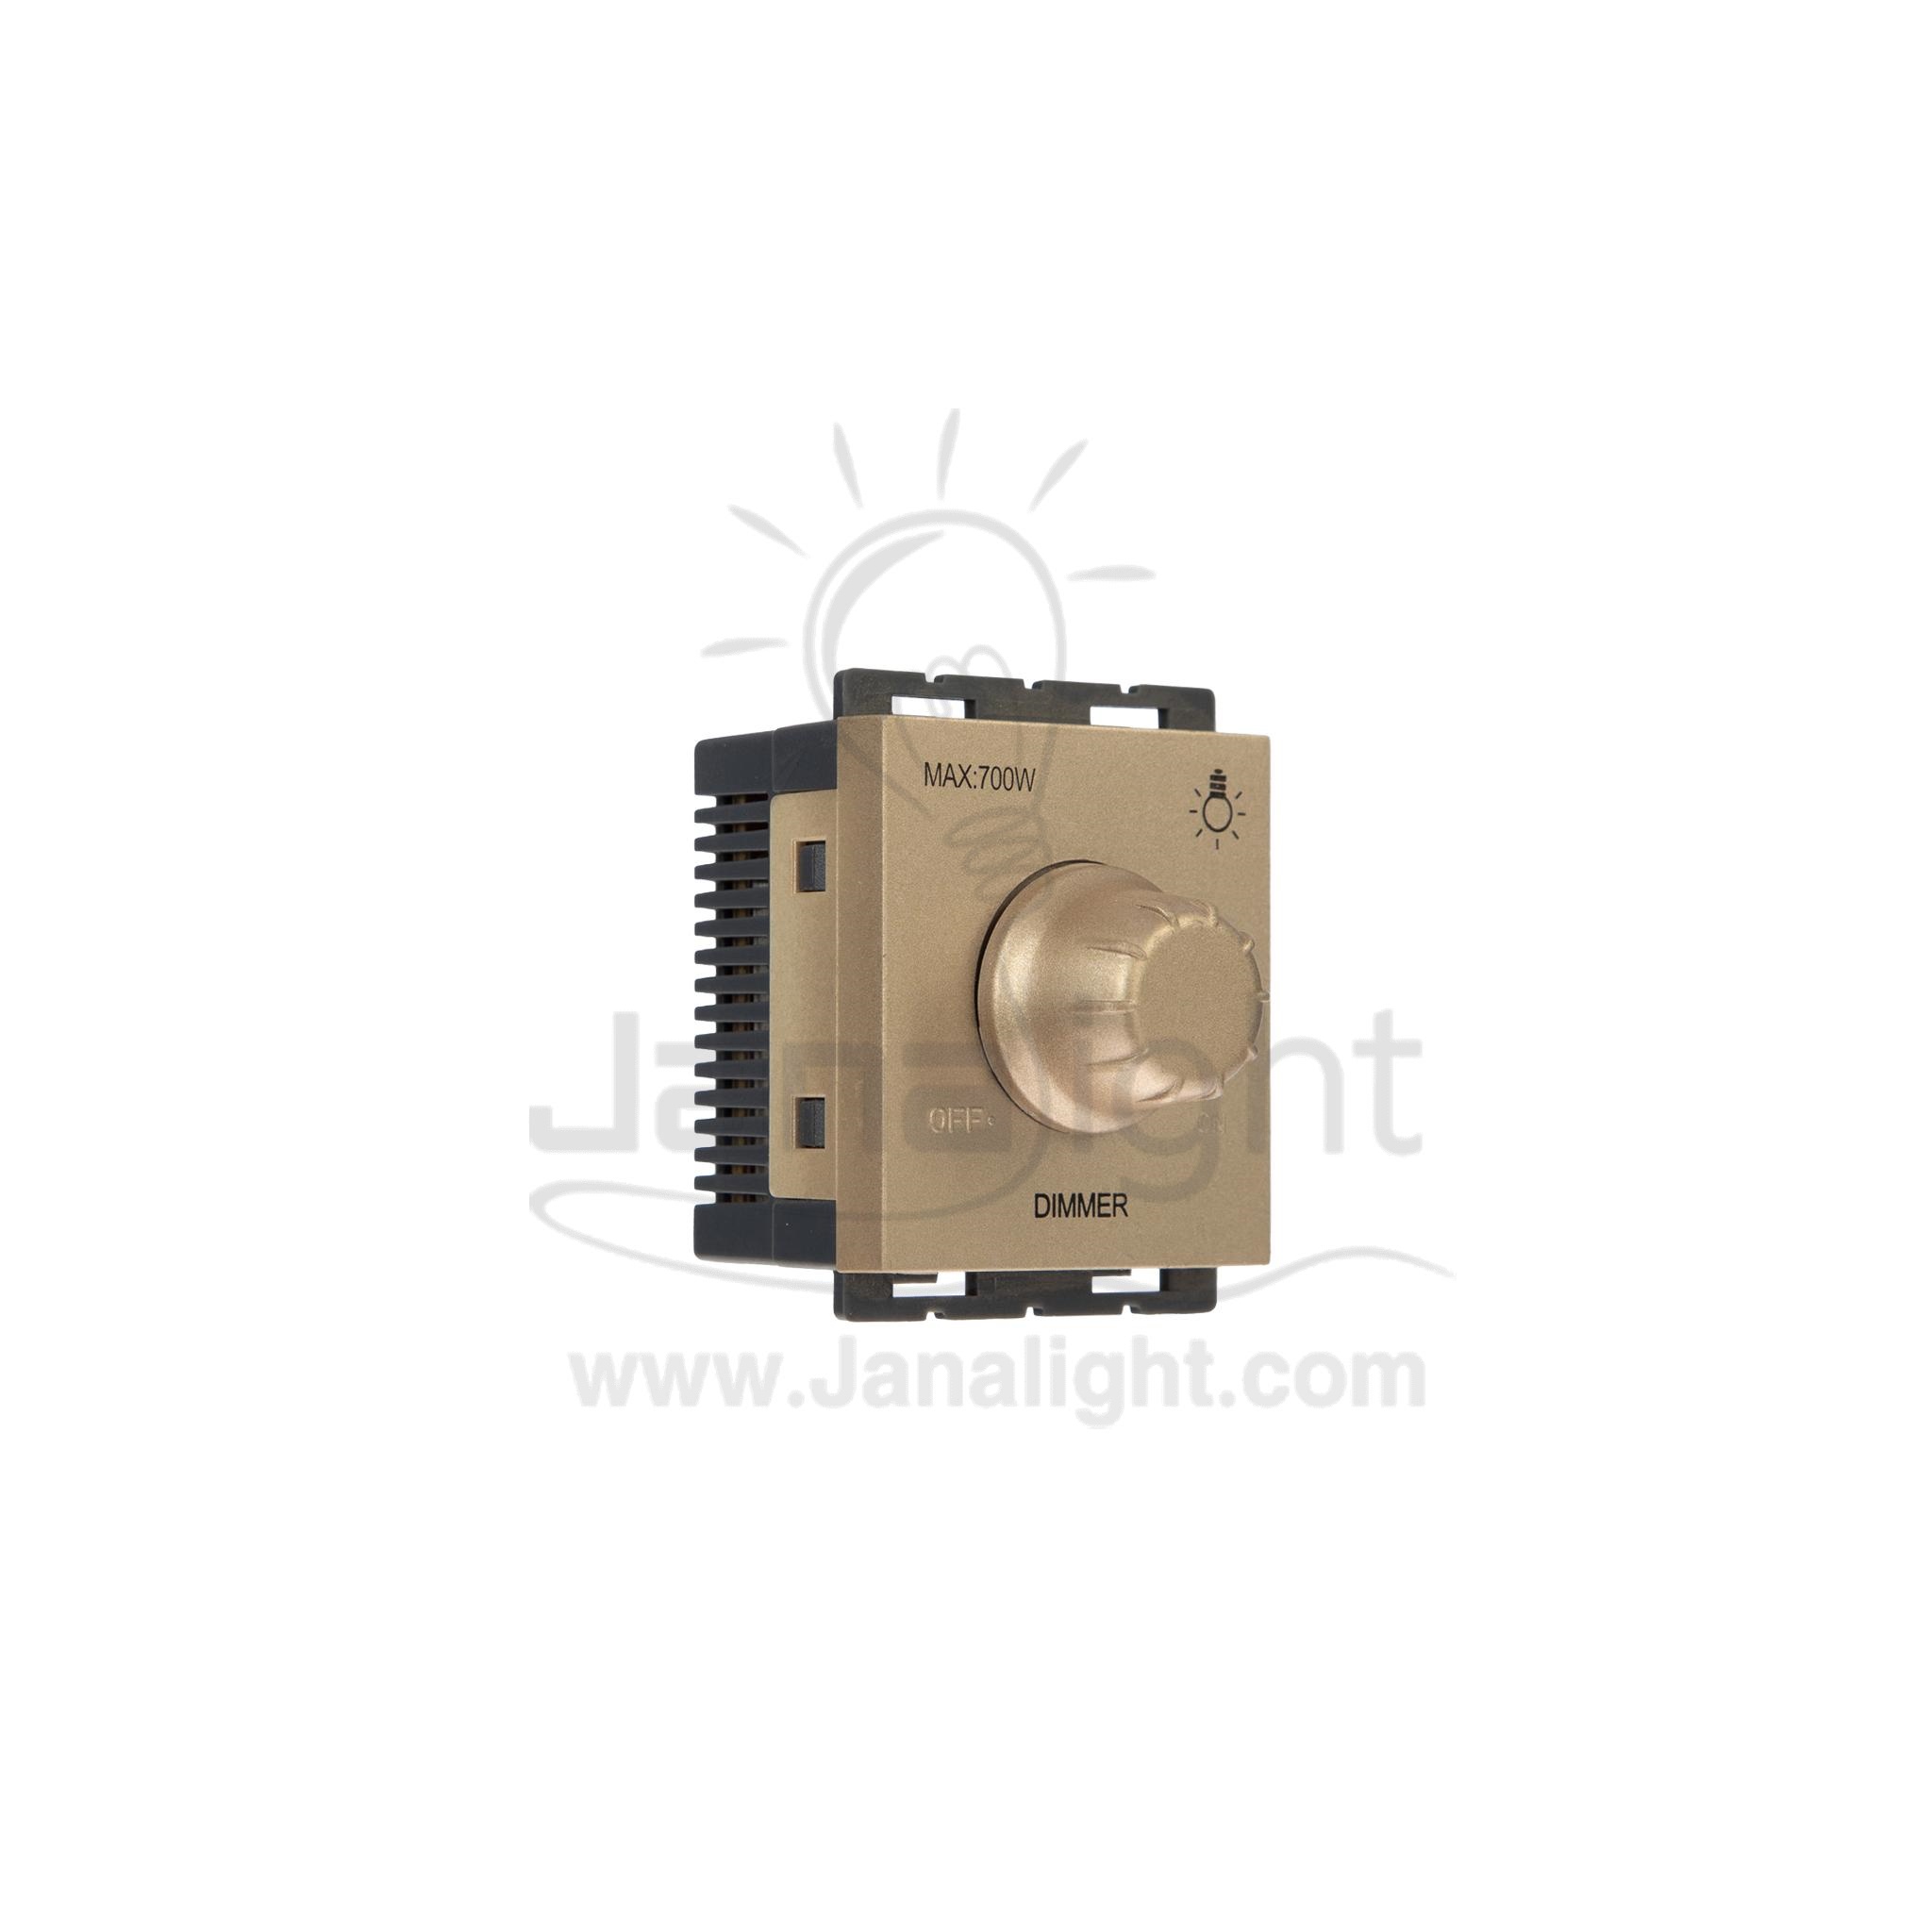 OSA دايمر انارة 700 وات شمباني osa Socket Dimmers 700w For Lighting champagne